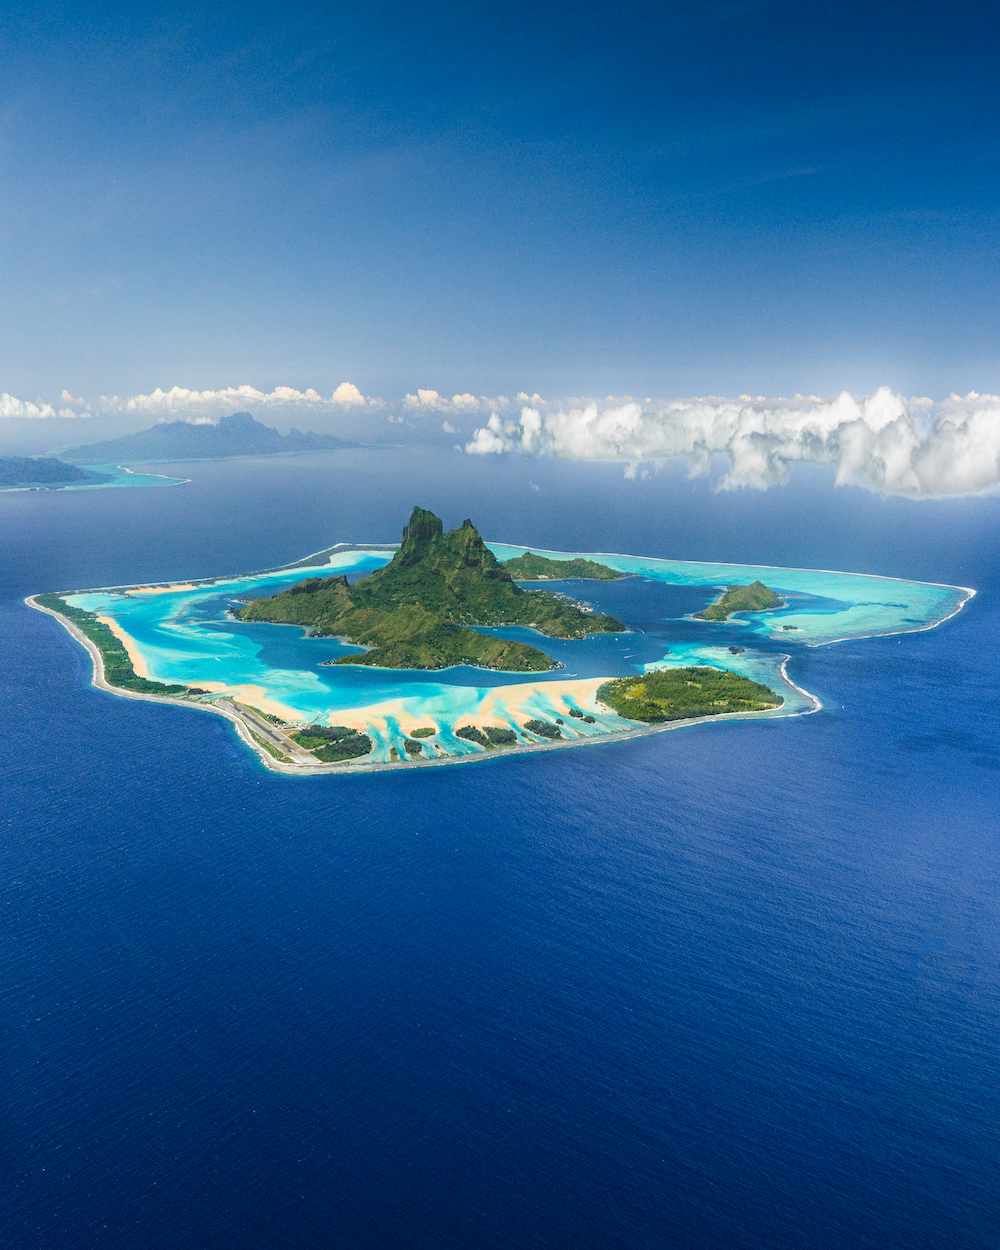 An aerial photograph of an island in the Pacific Ocean.